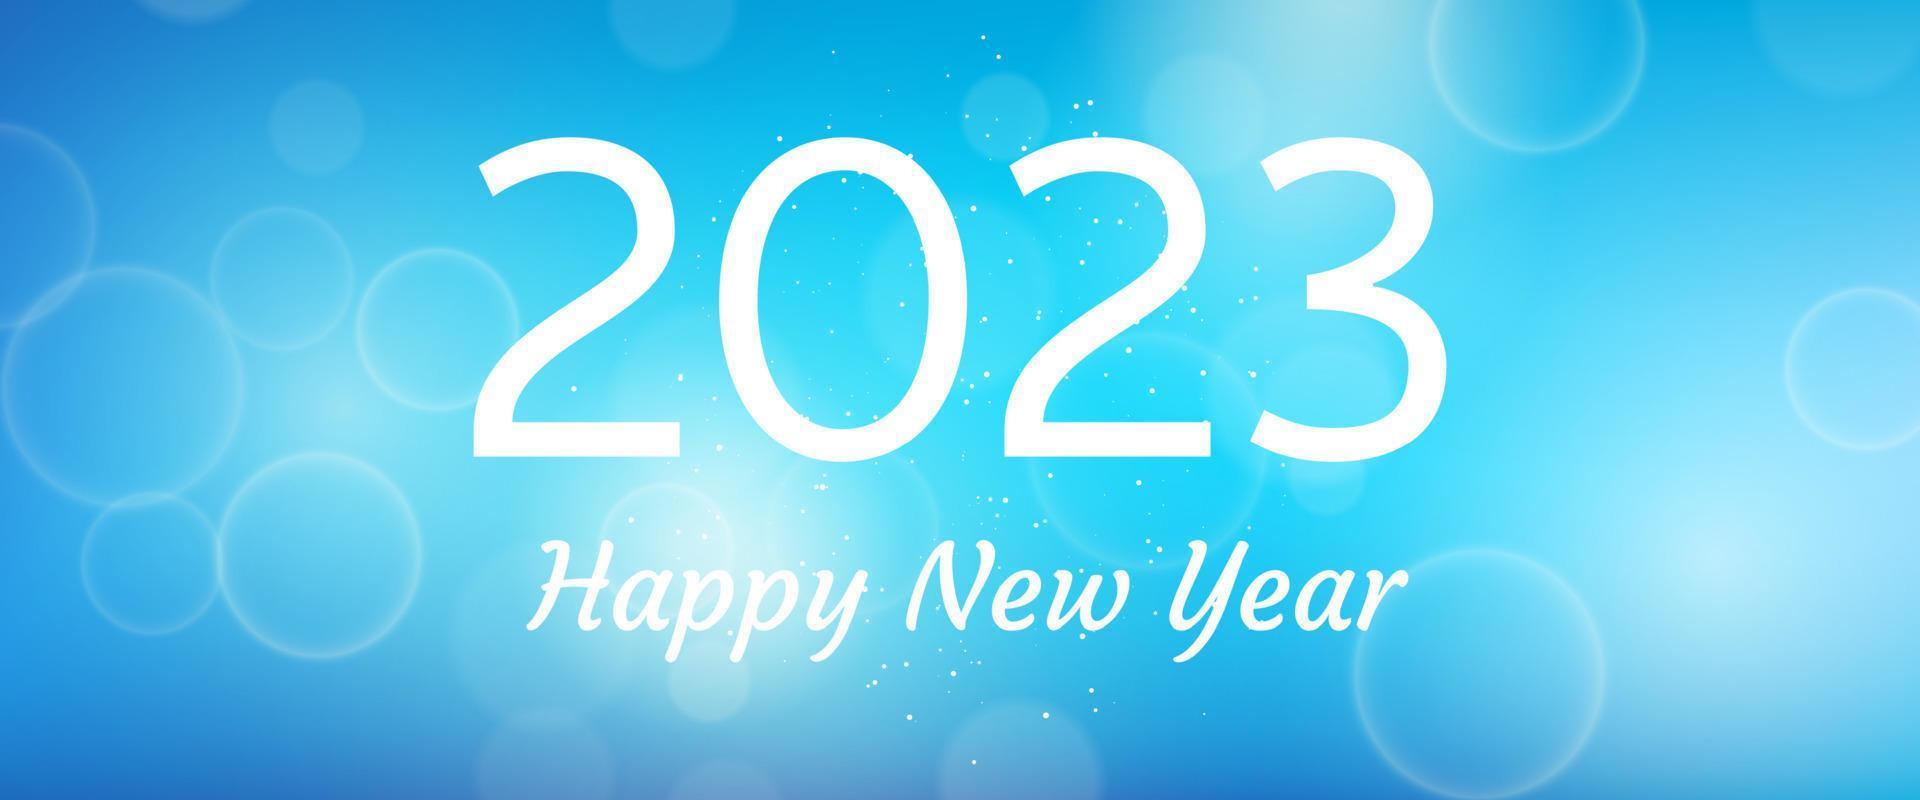 Happy new year 2023 incription on blurred background vector